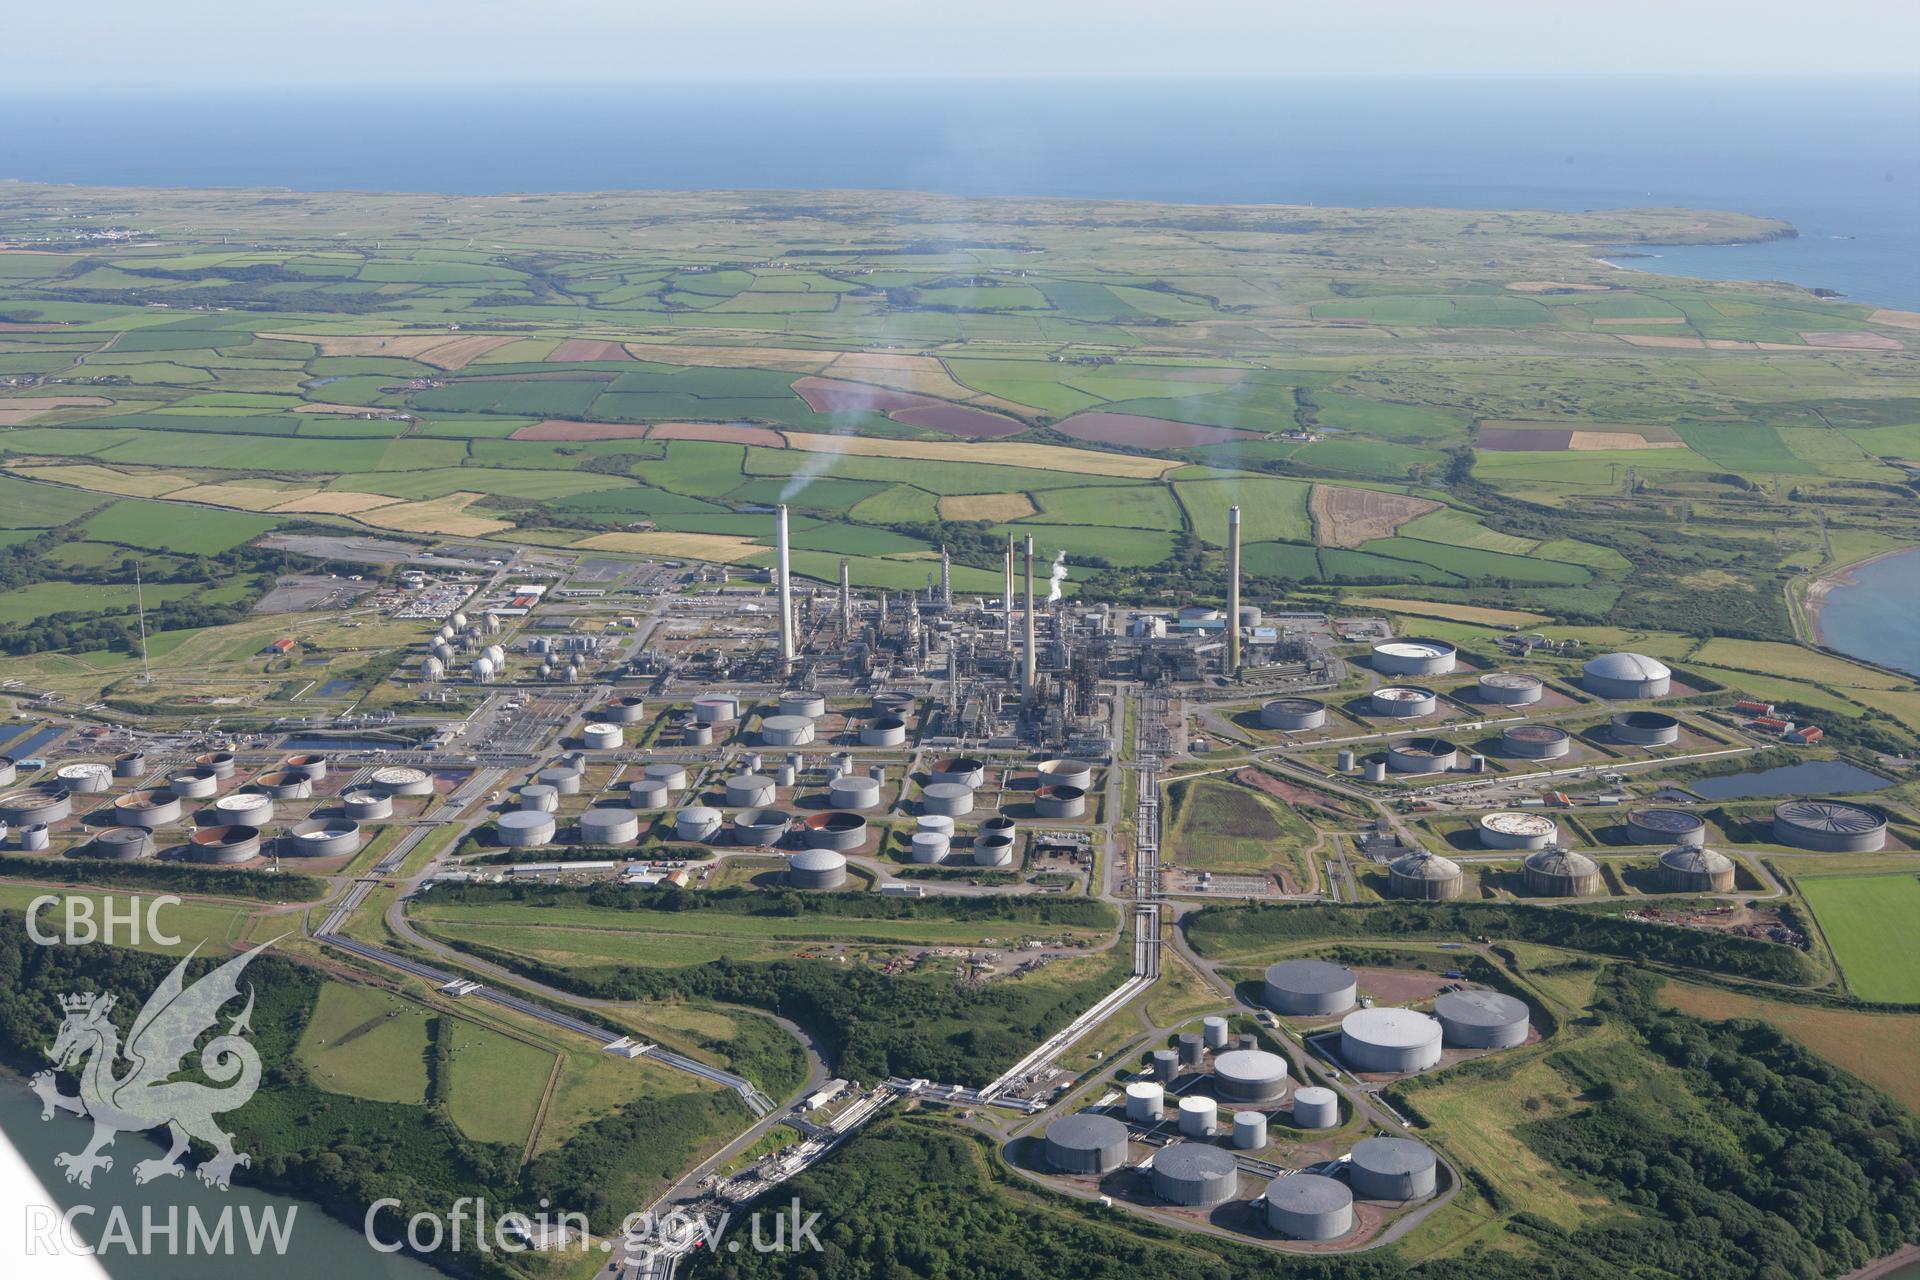 RCAHMW colour oblique aerial photograph of Angle Bay BP Oil Terminal and Pumping Station, Popton, Milford Haven. Taken on 30 July 2007 by Toby Driver